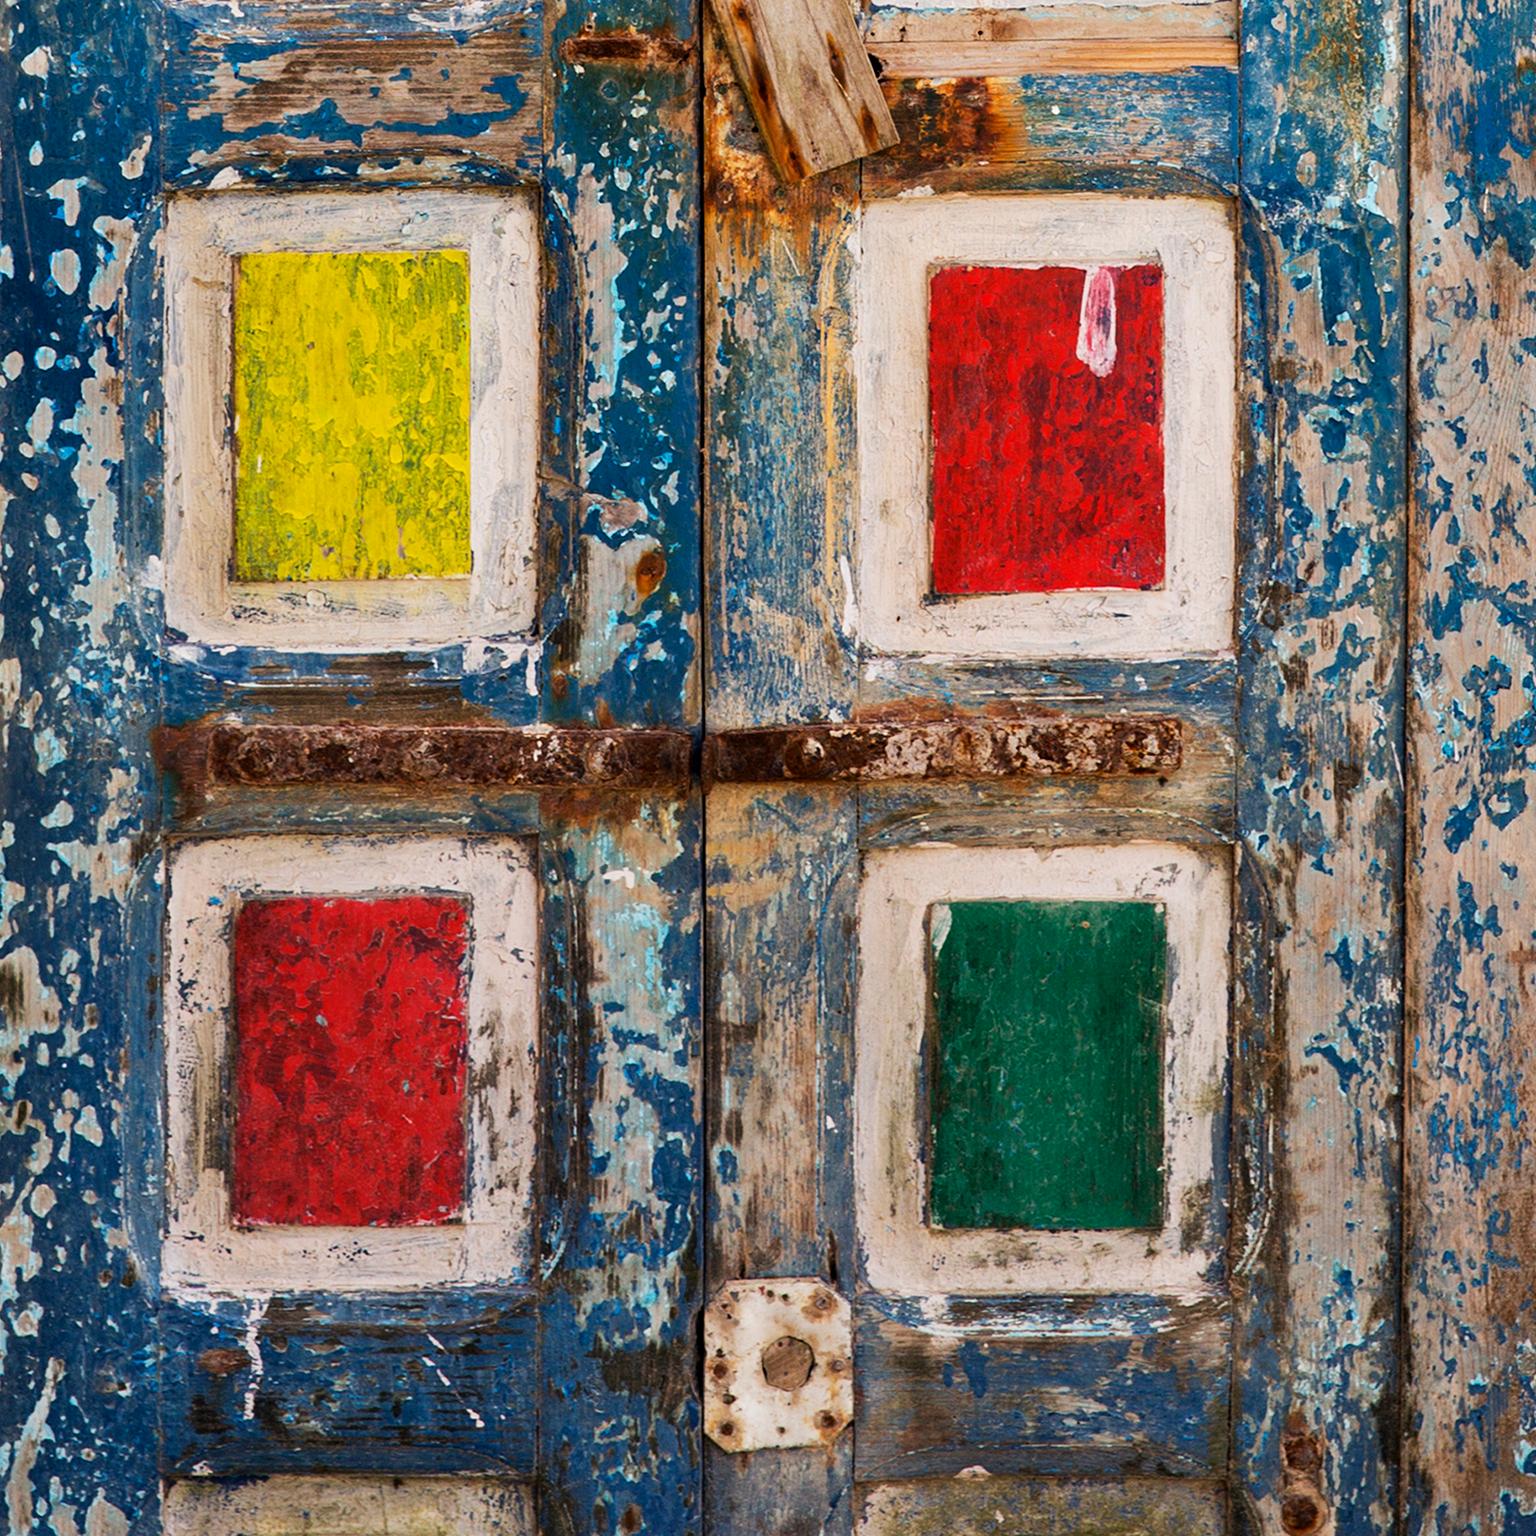 Painted Door, Morocco, 2016 - Photograph by  Cosmo Condina